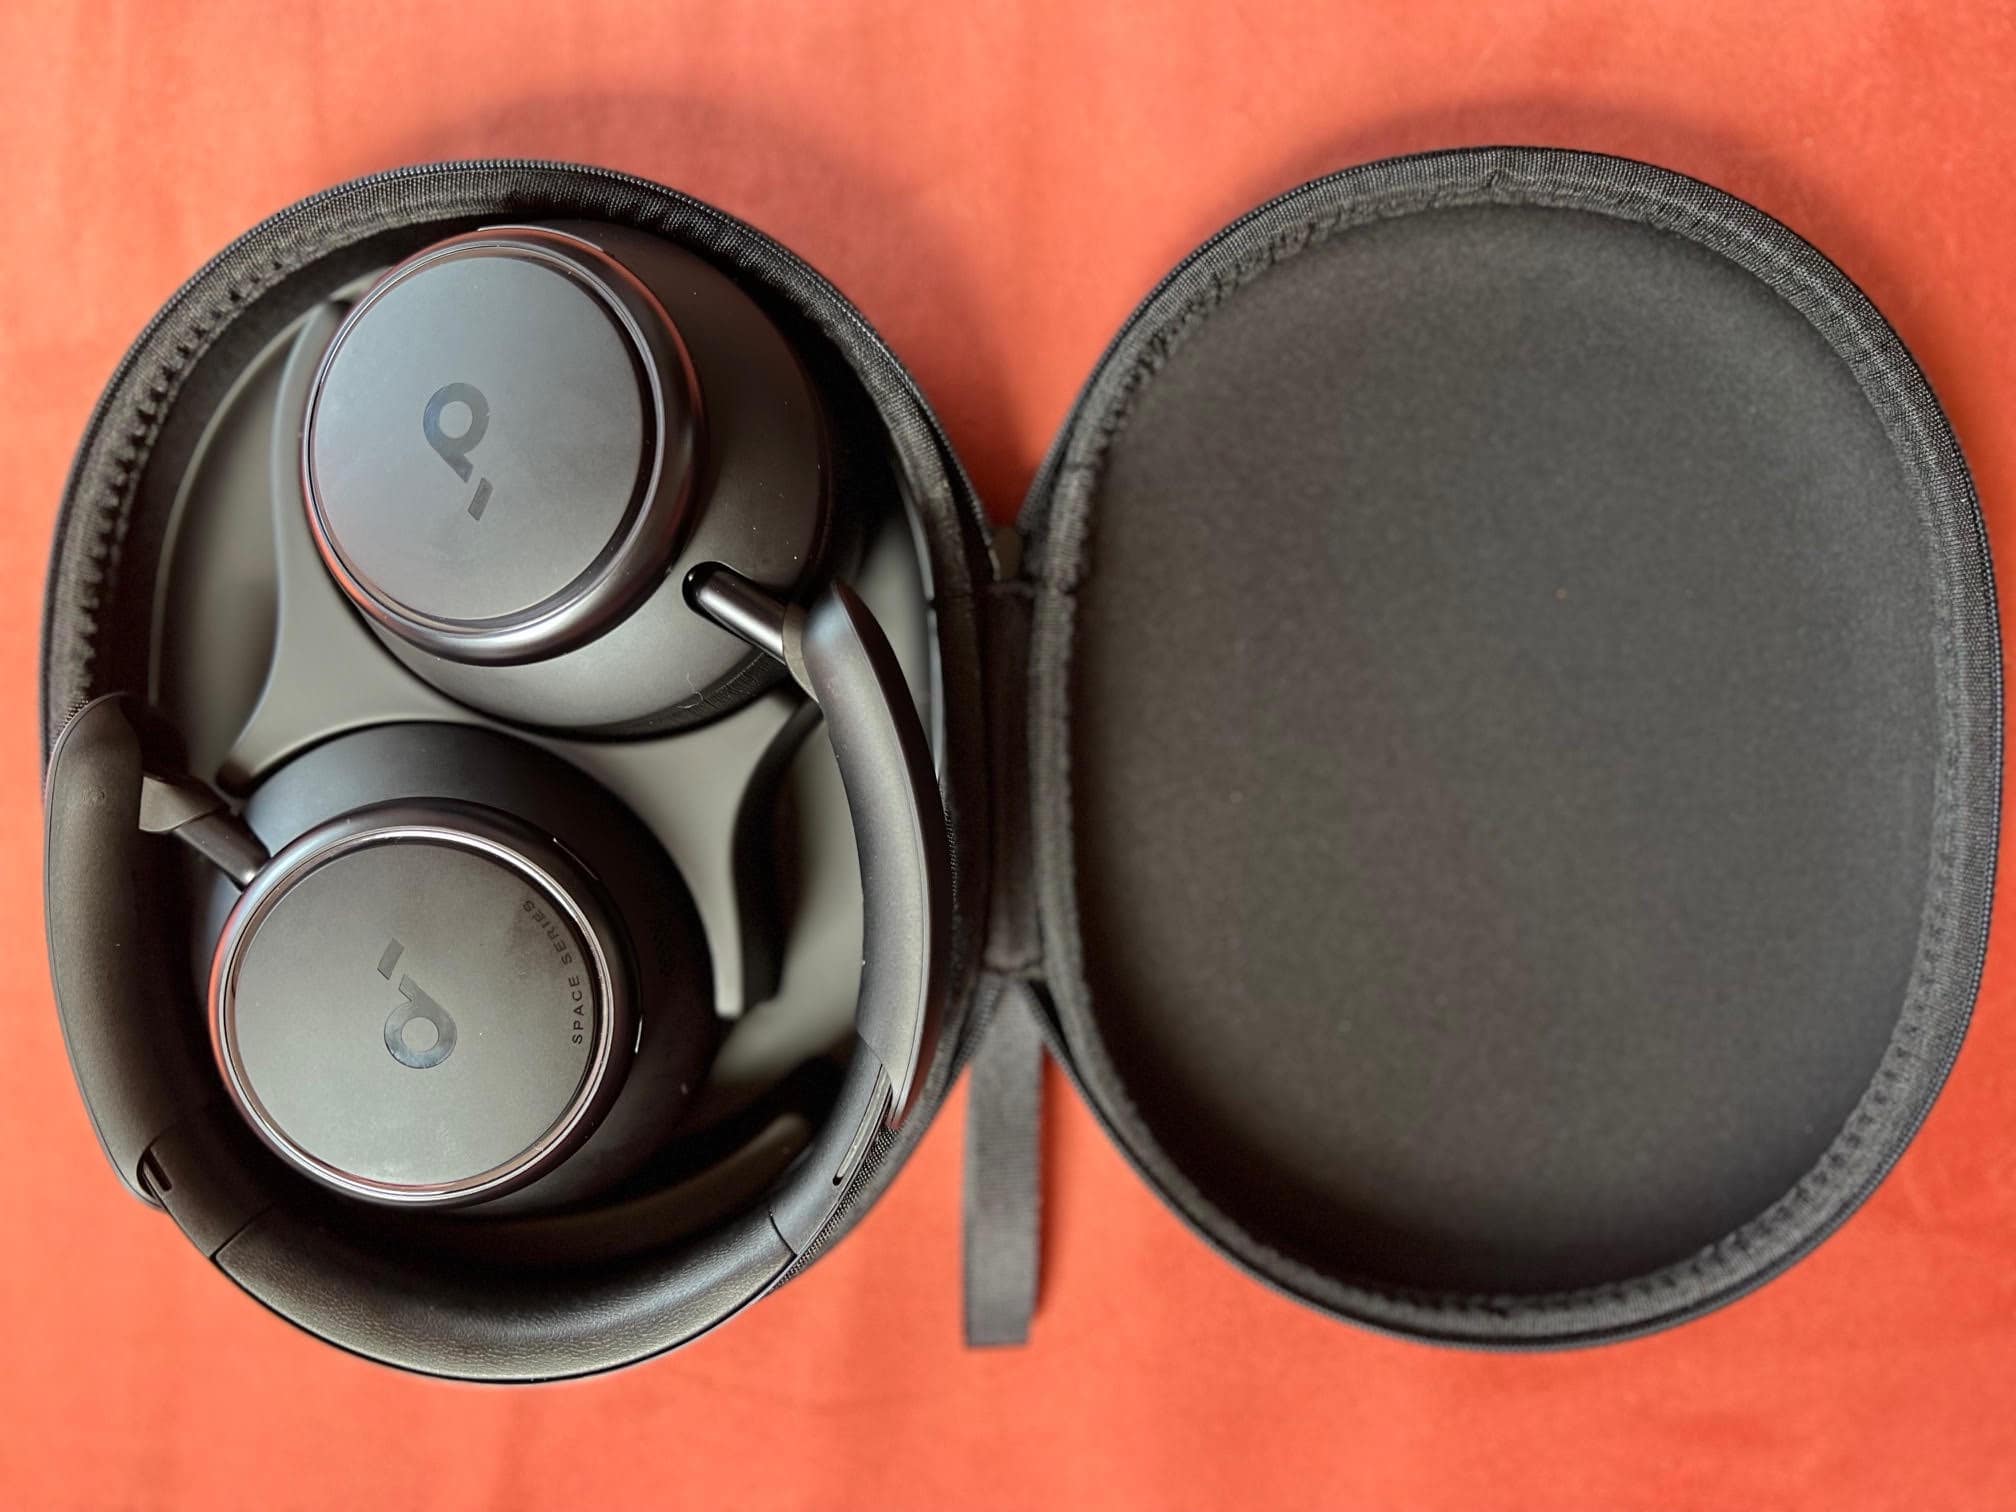 Soundcore Q45 headphones crush noise cancellation and battery life [Review]